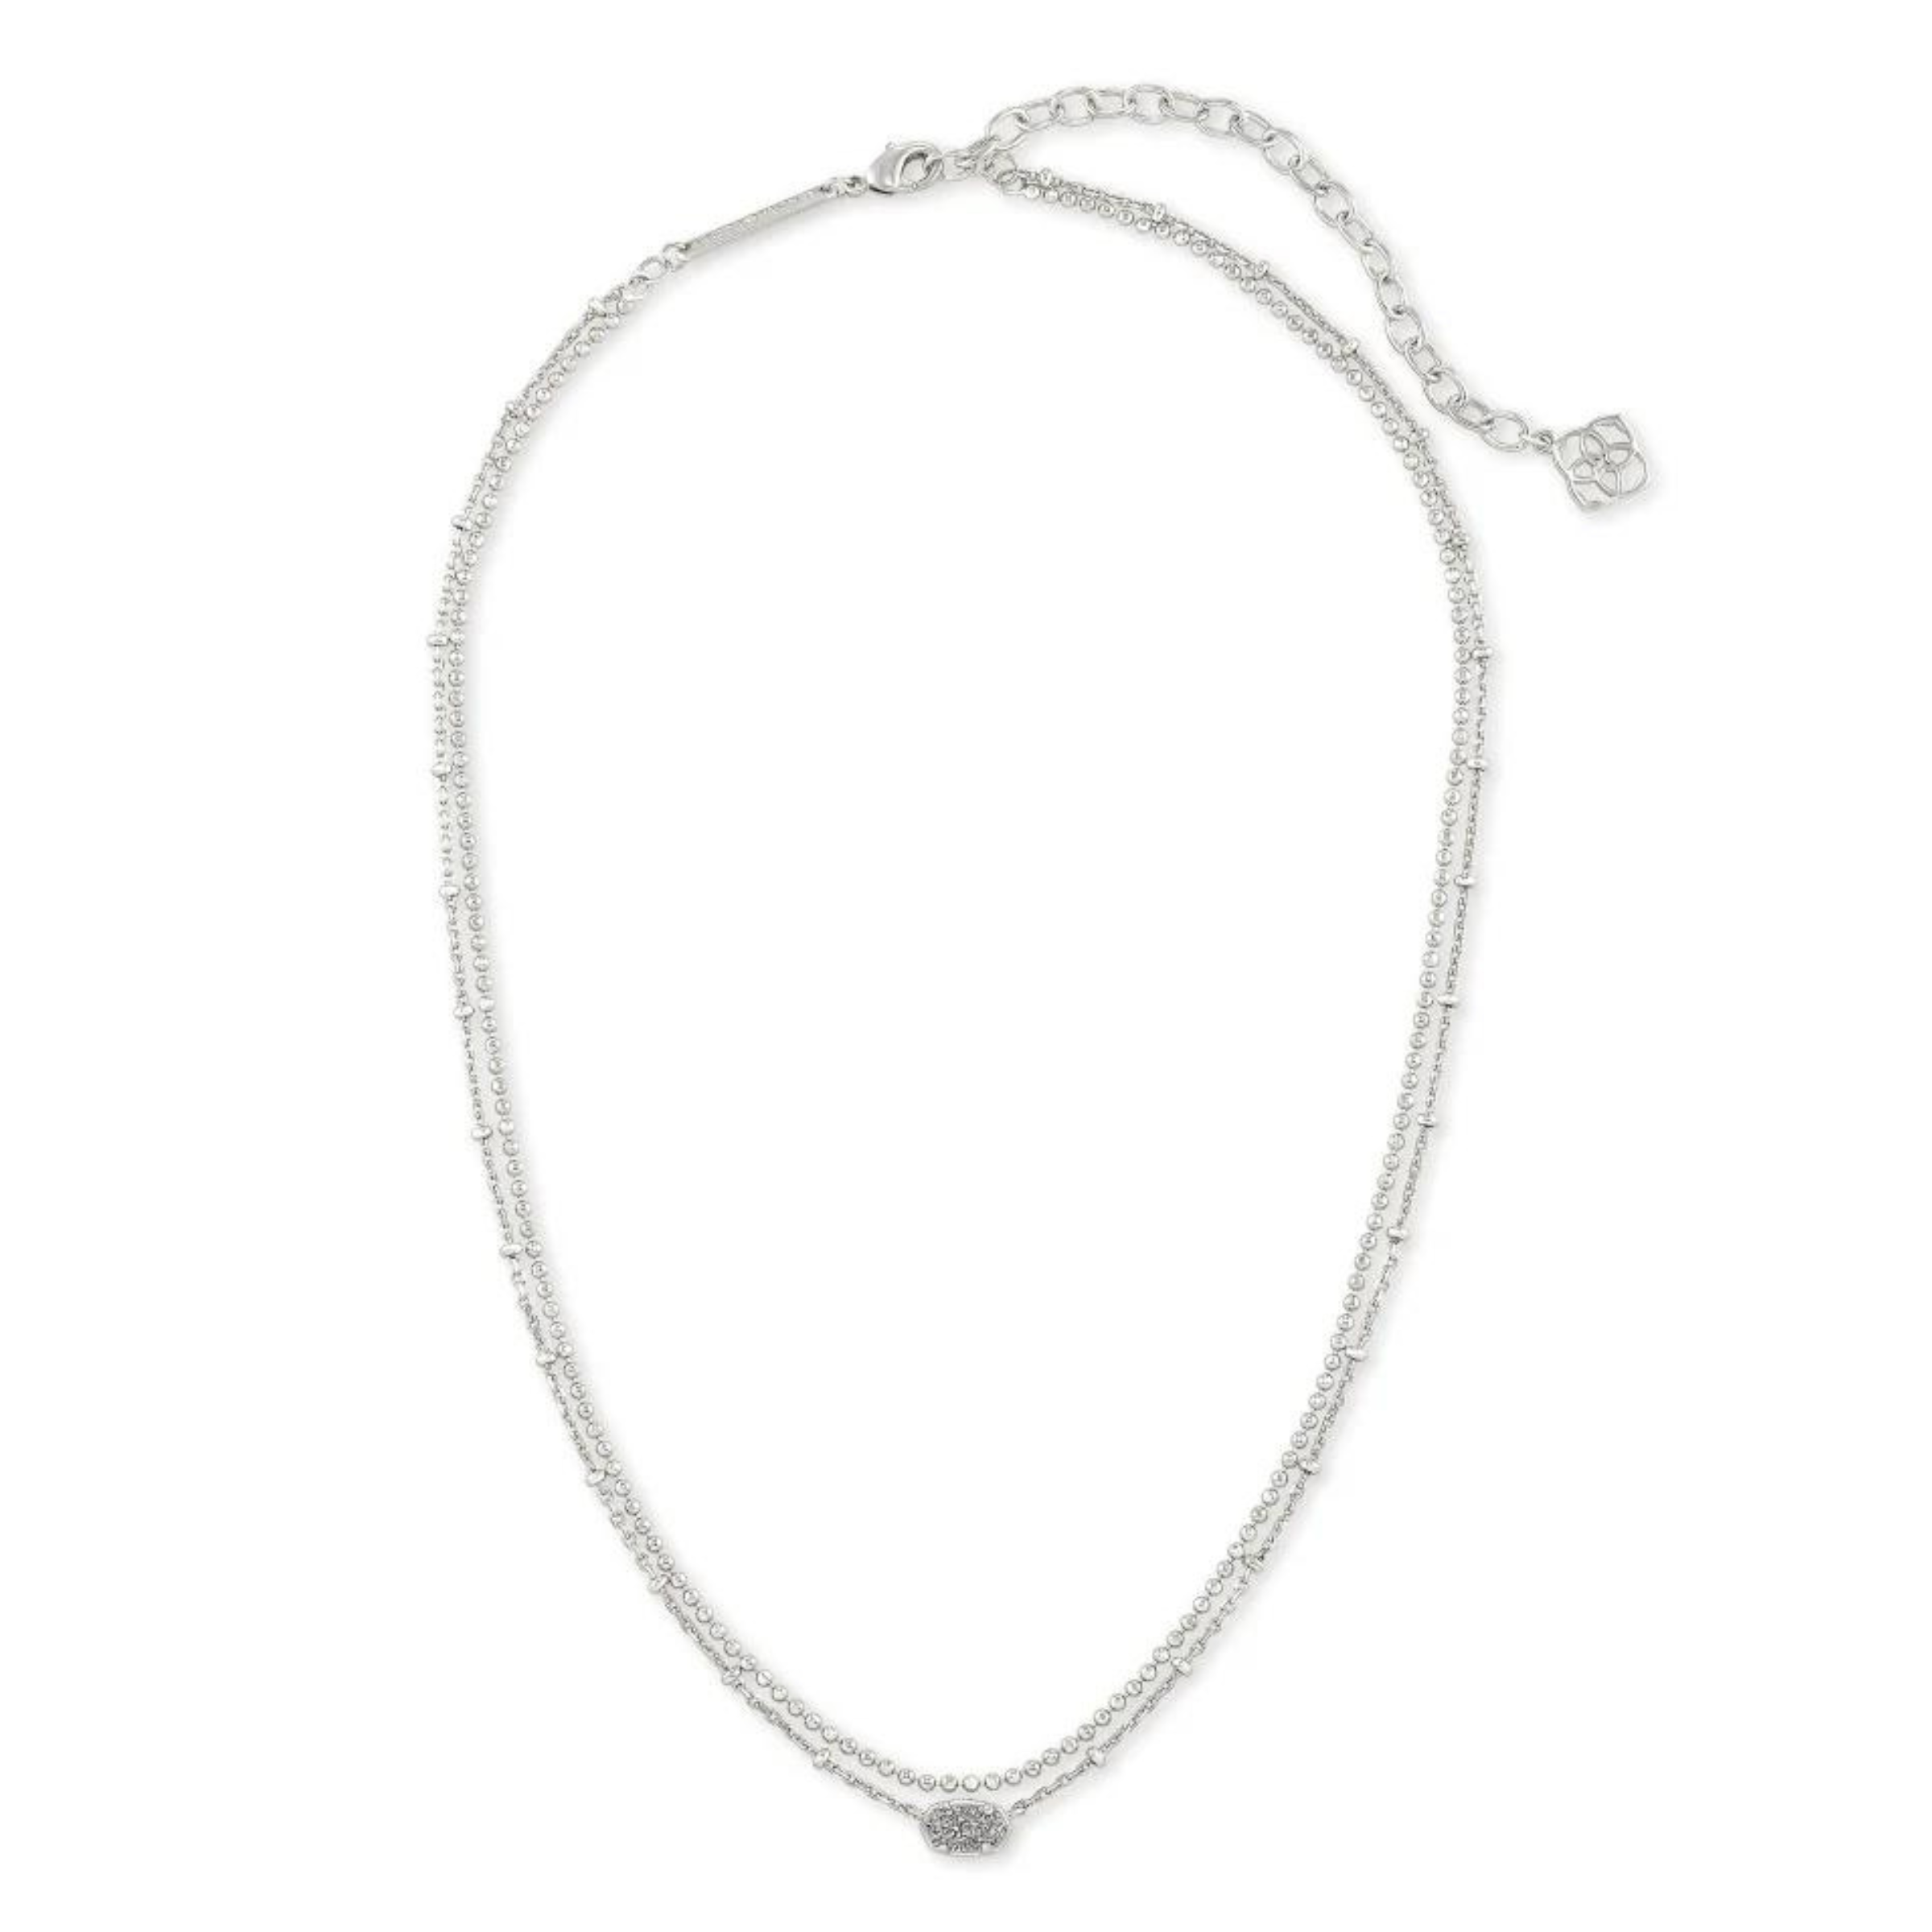 Kendra Scott | Emilie Silver Multi Strand Necklace in Platinum Drusy - Giddy Up Glamour Boutique